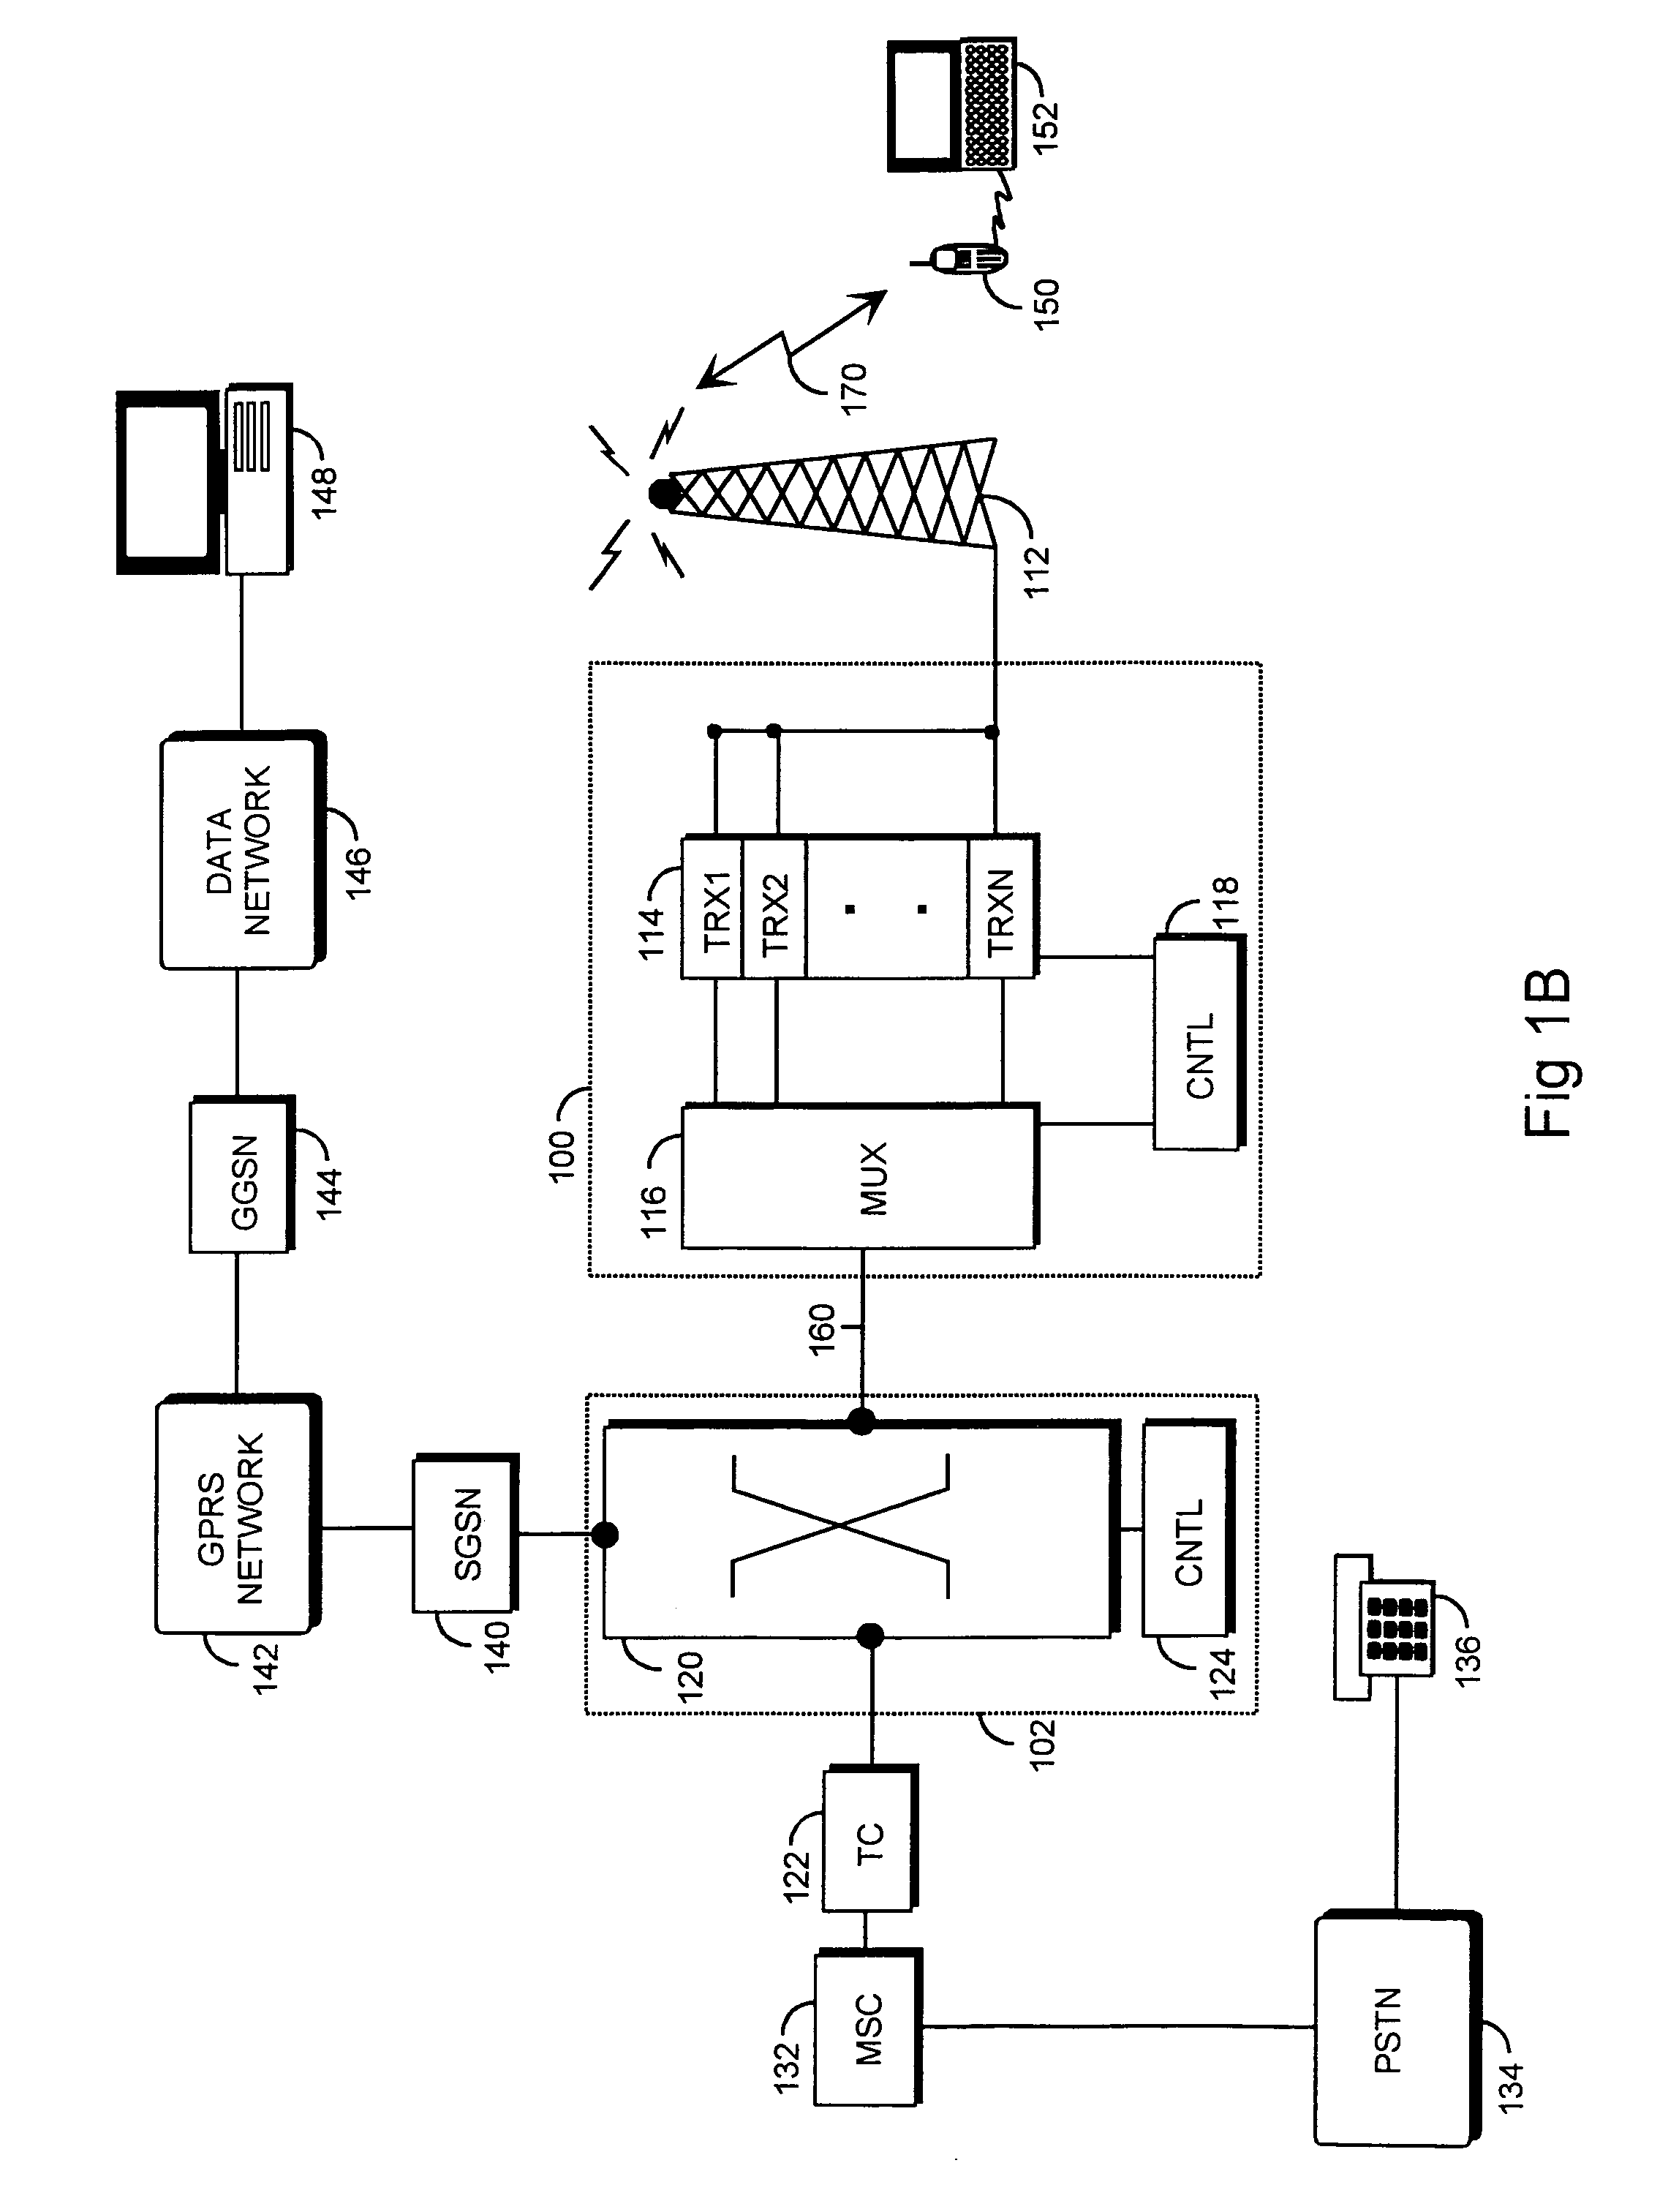 Data transmission in packet-switched radio system implementing user equipment location service